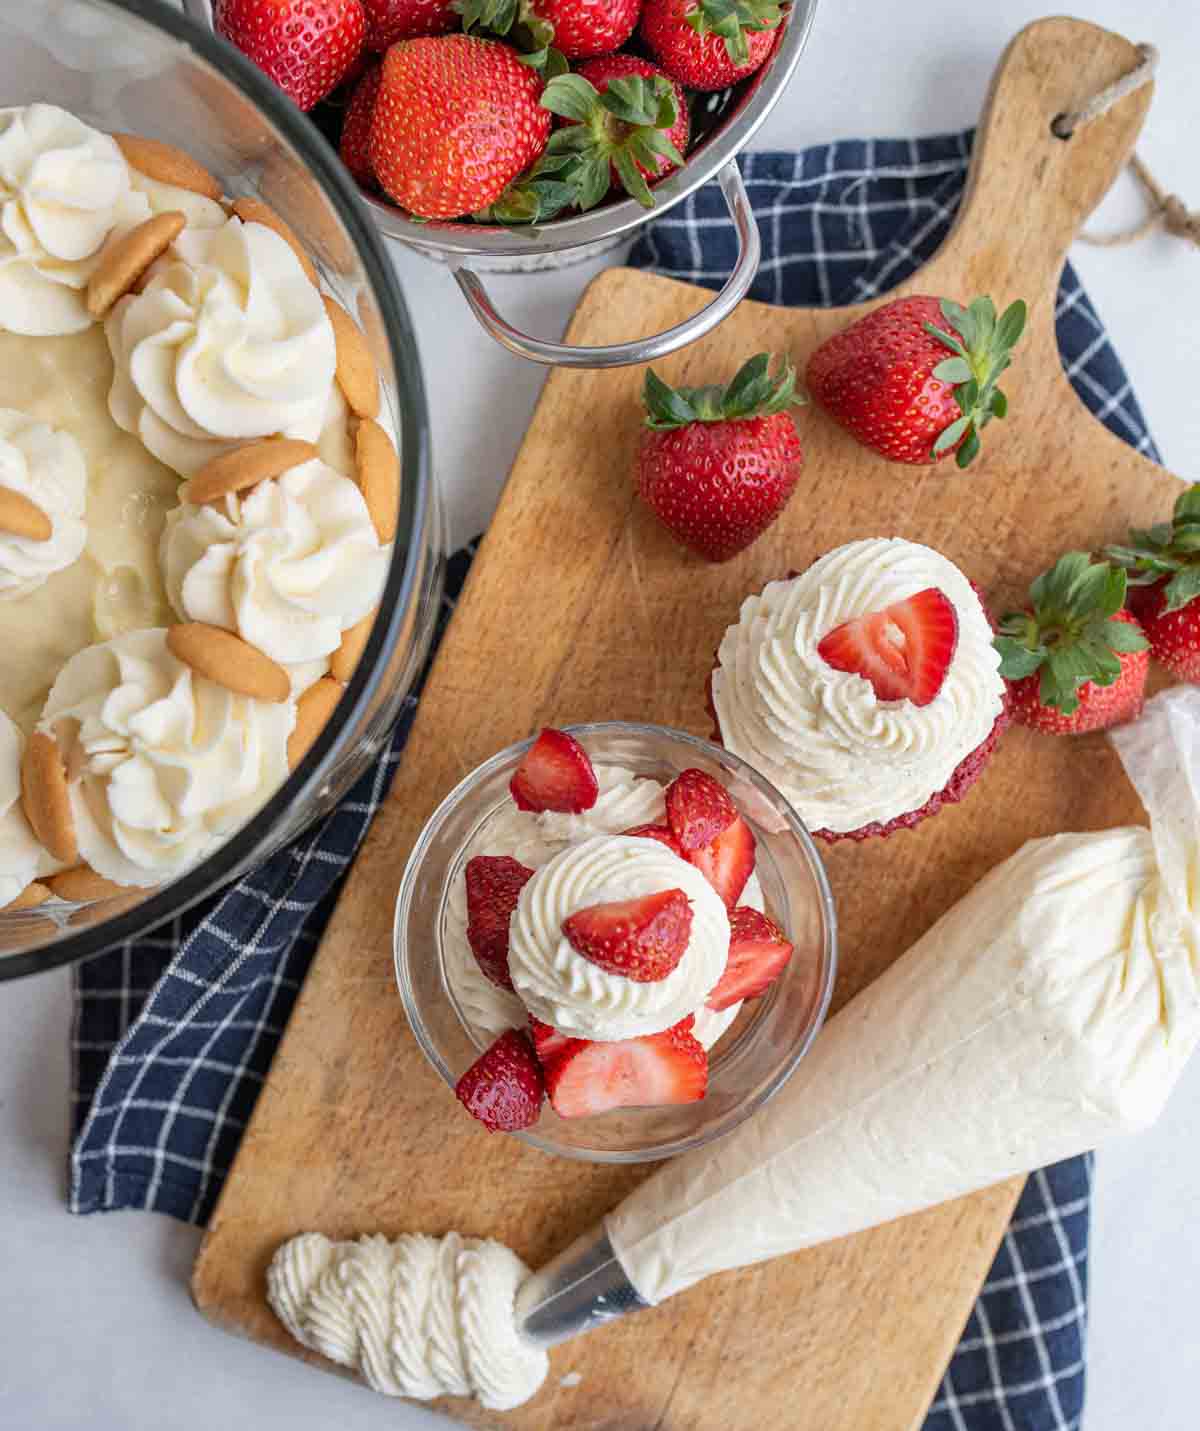 Chantilly cream in a piping bag featuring strawberries and other desserts.